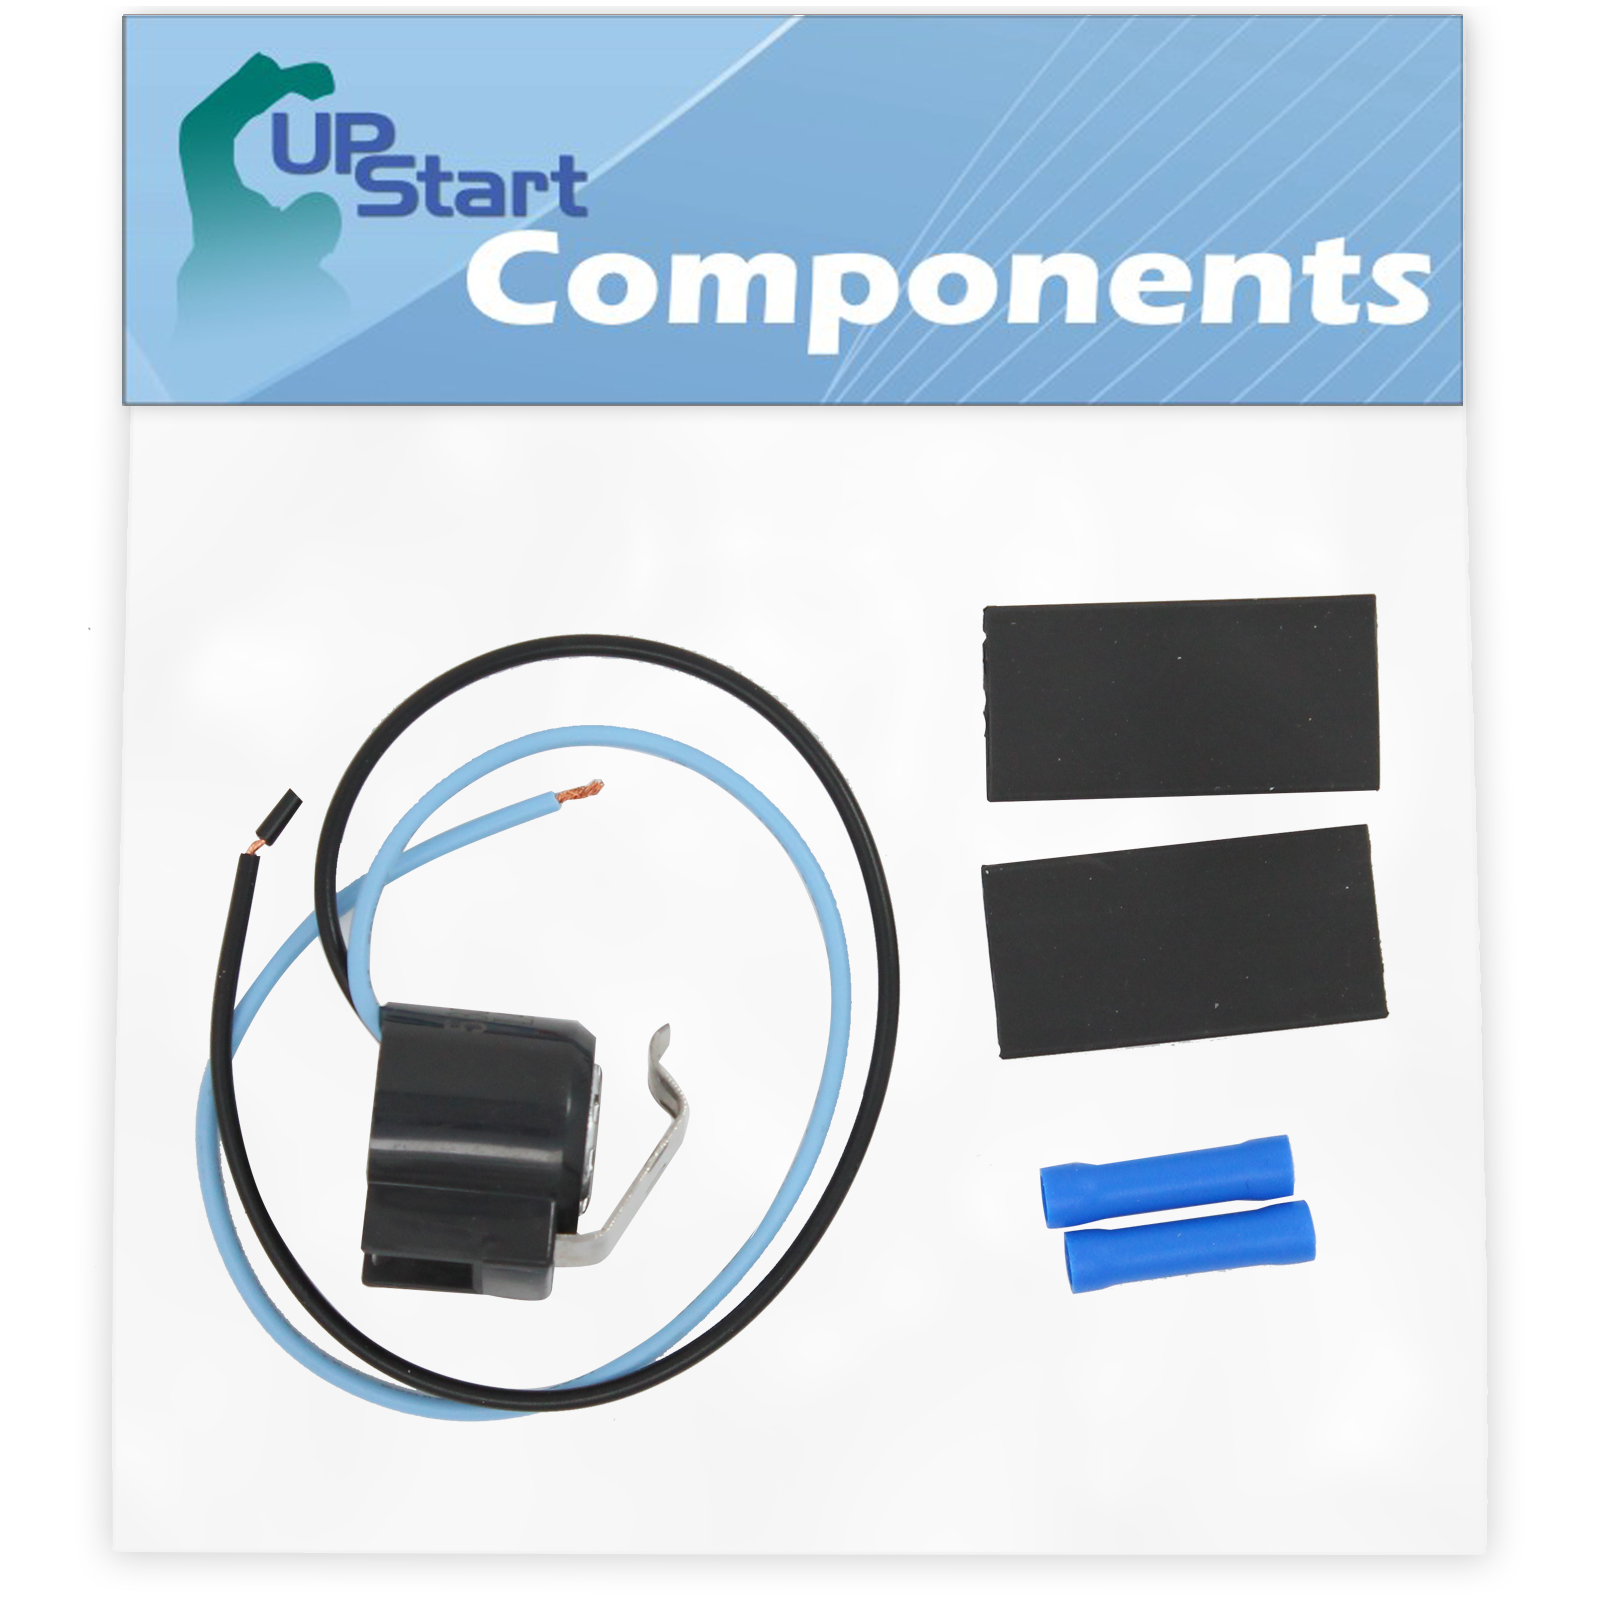 5303918214 Defrost Thermostat Replacement for Frigidaire FGUS2645LF3 Refrigerator - Compatible with 5303918214 Defrost Thermostat Kit - UpStart Components Brand - image 1 of 2